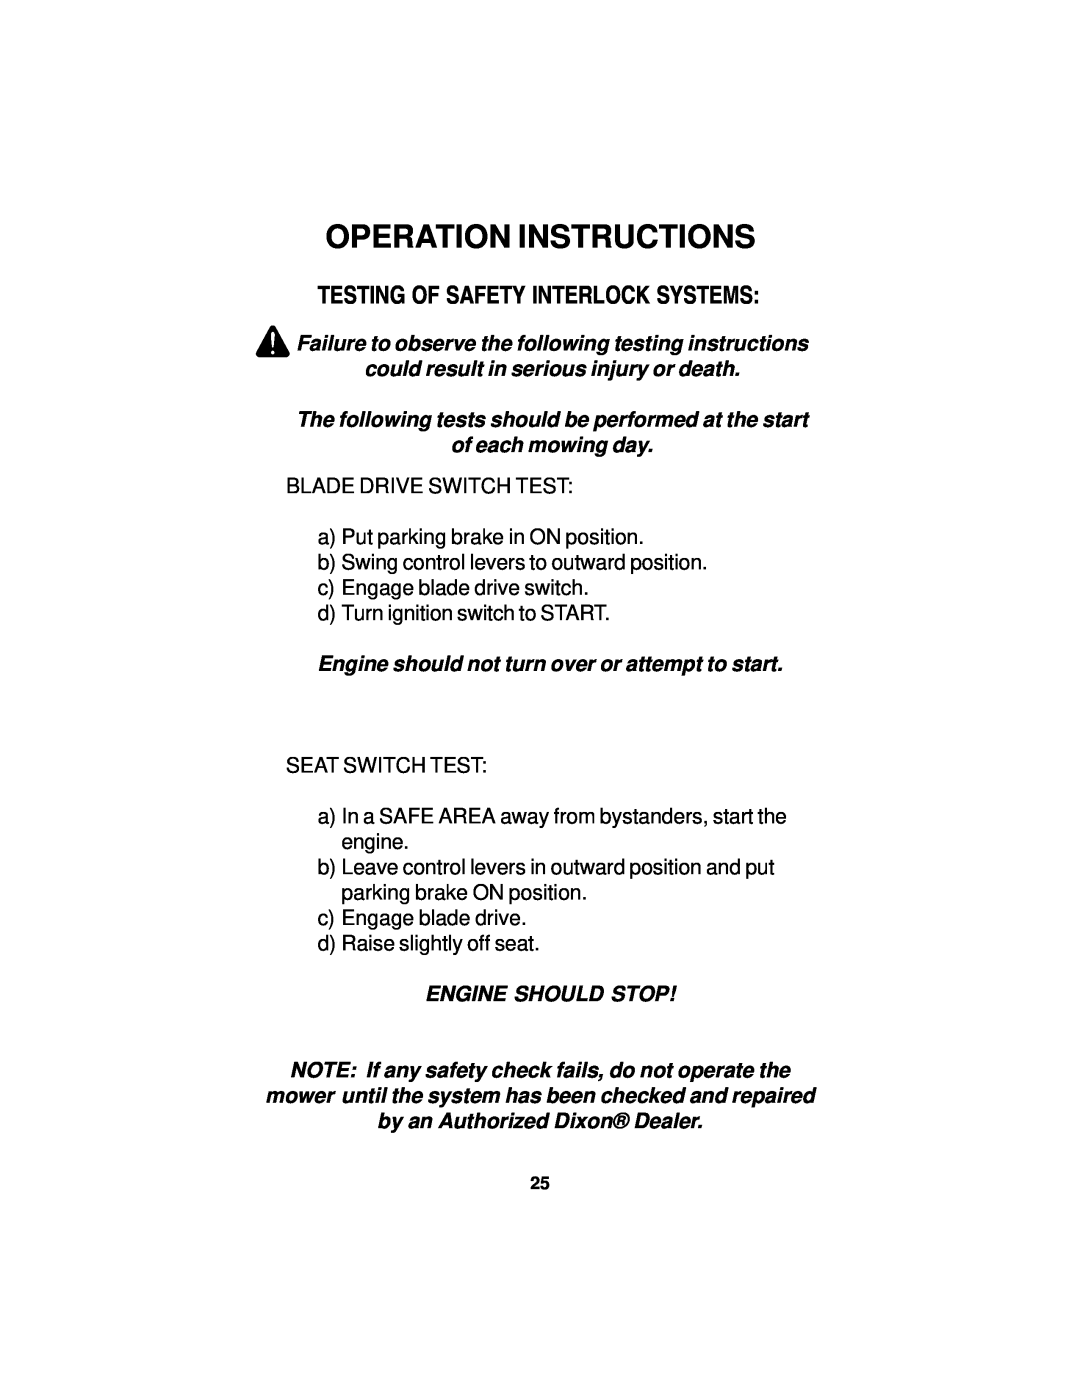 Dixon 18124-0804 manual Operation Instructions, Testing Of Safety Interlock Systems 